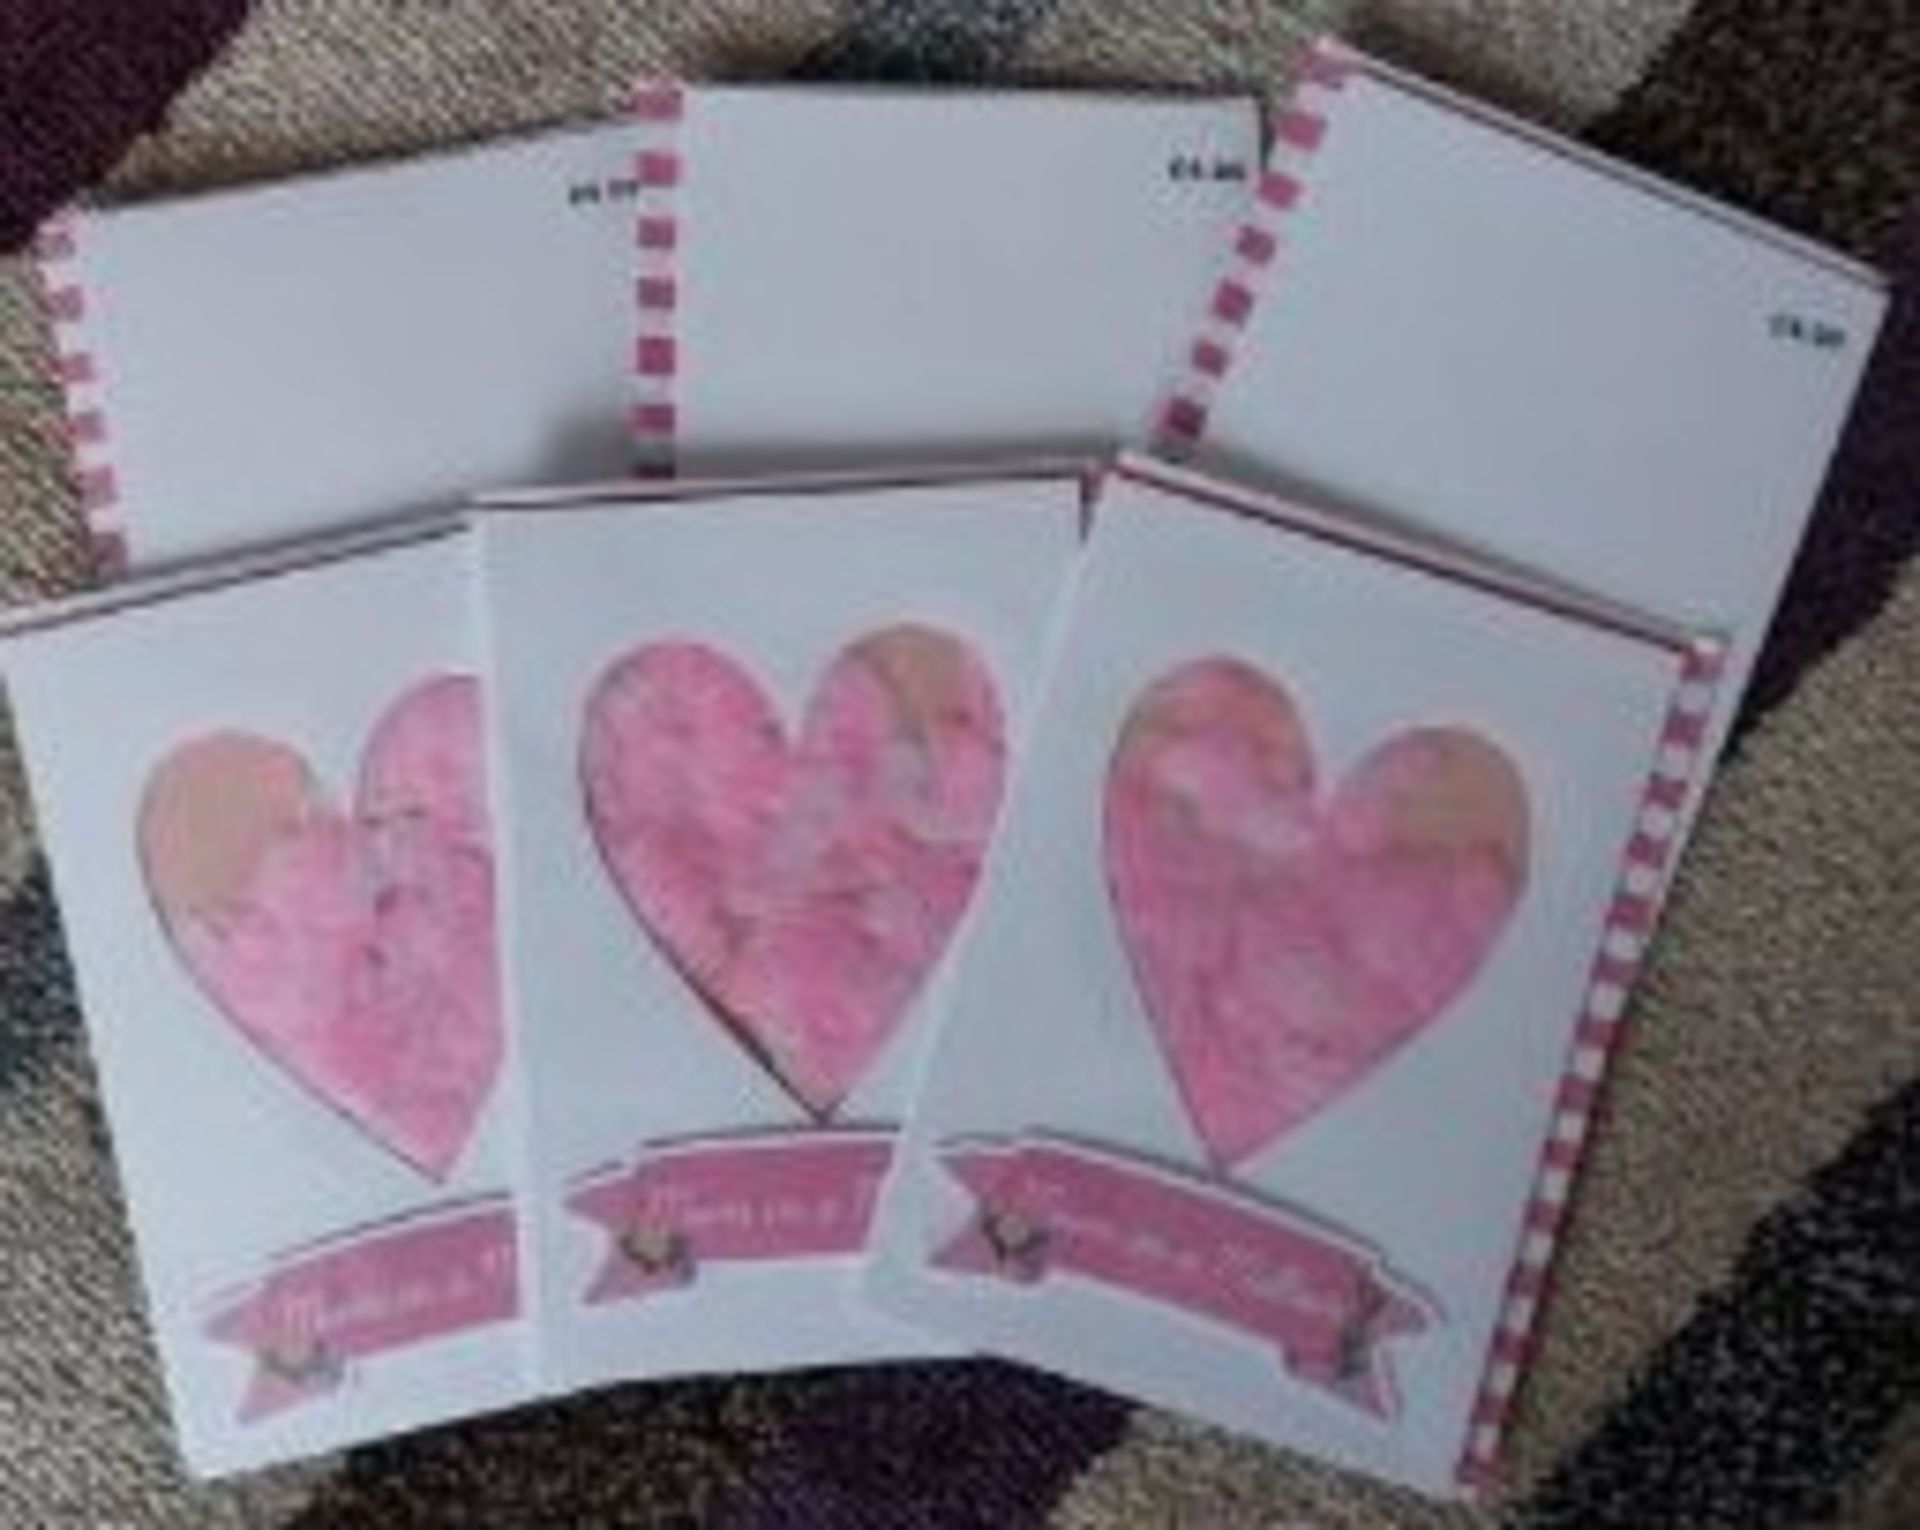 Mum In A Million Cards x 48 (RRP £196) - Image 3 of 4